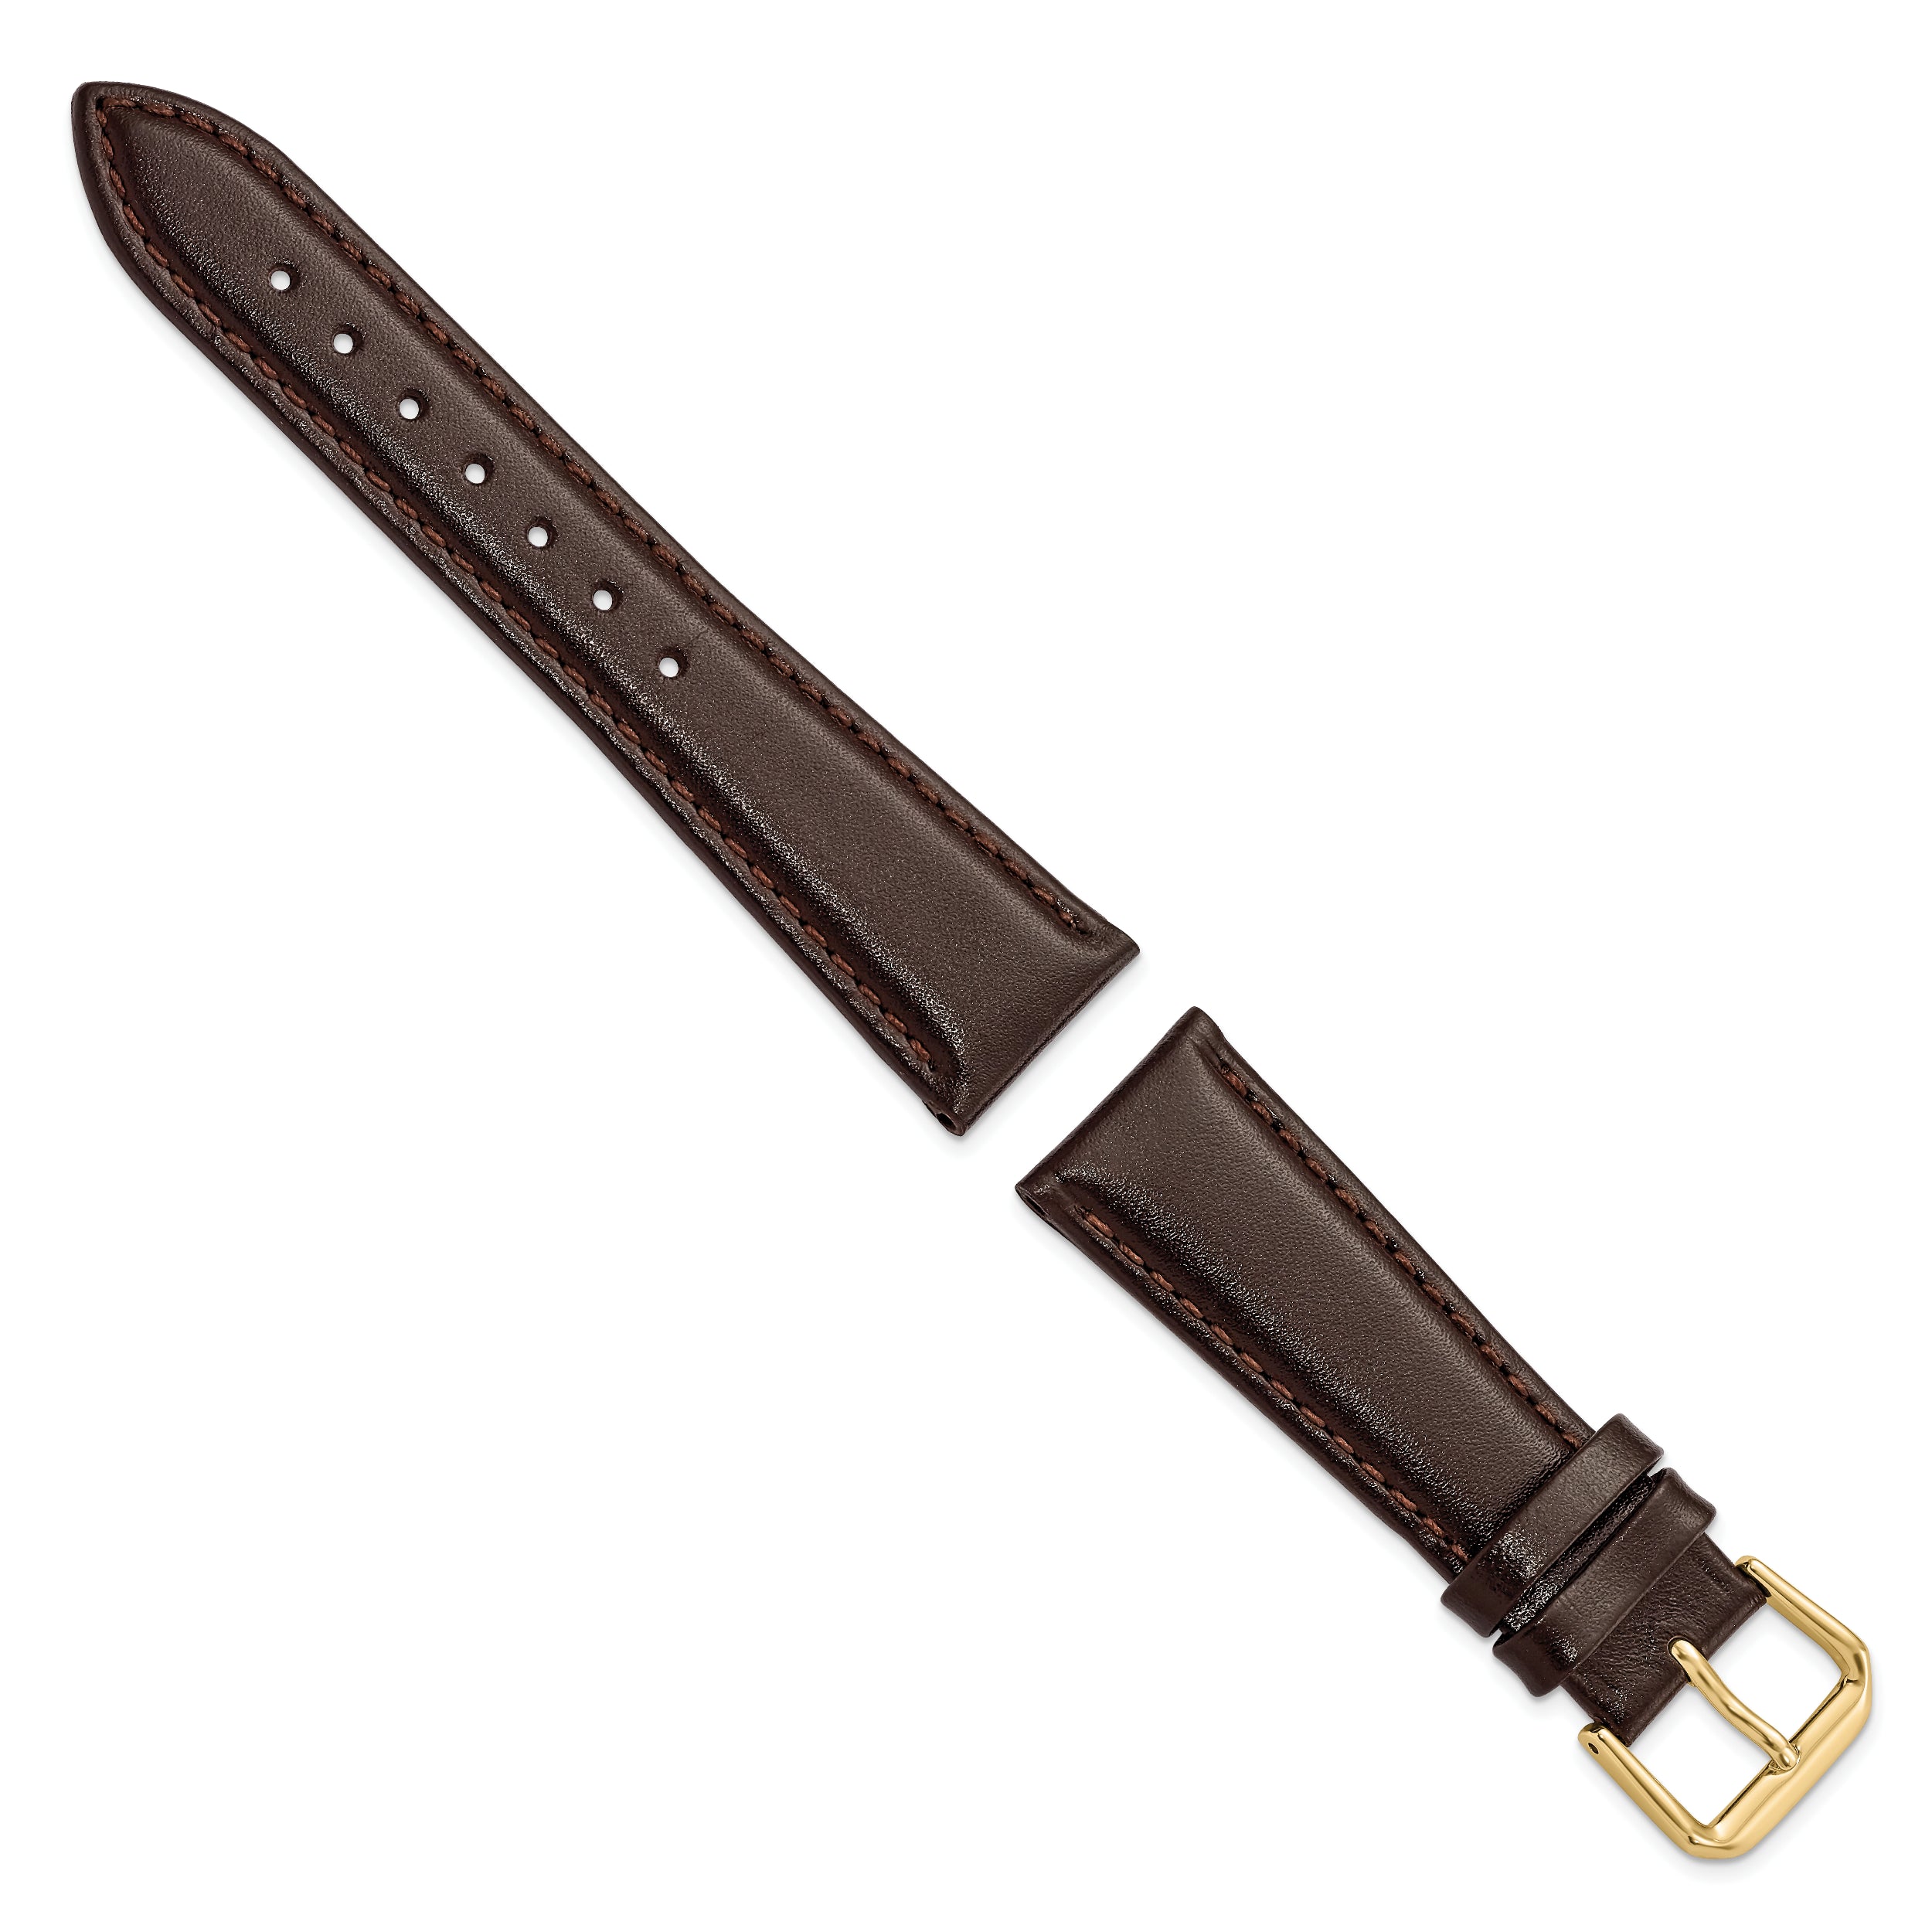 12mm Short Dark Brown Smooth Leather with Gold-tone Buckle 6.25 inch Watch Band